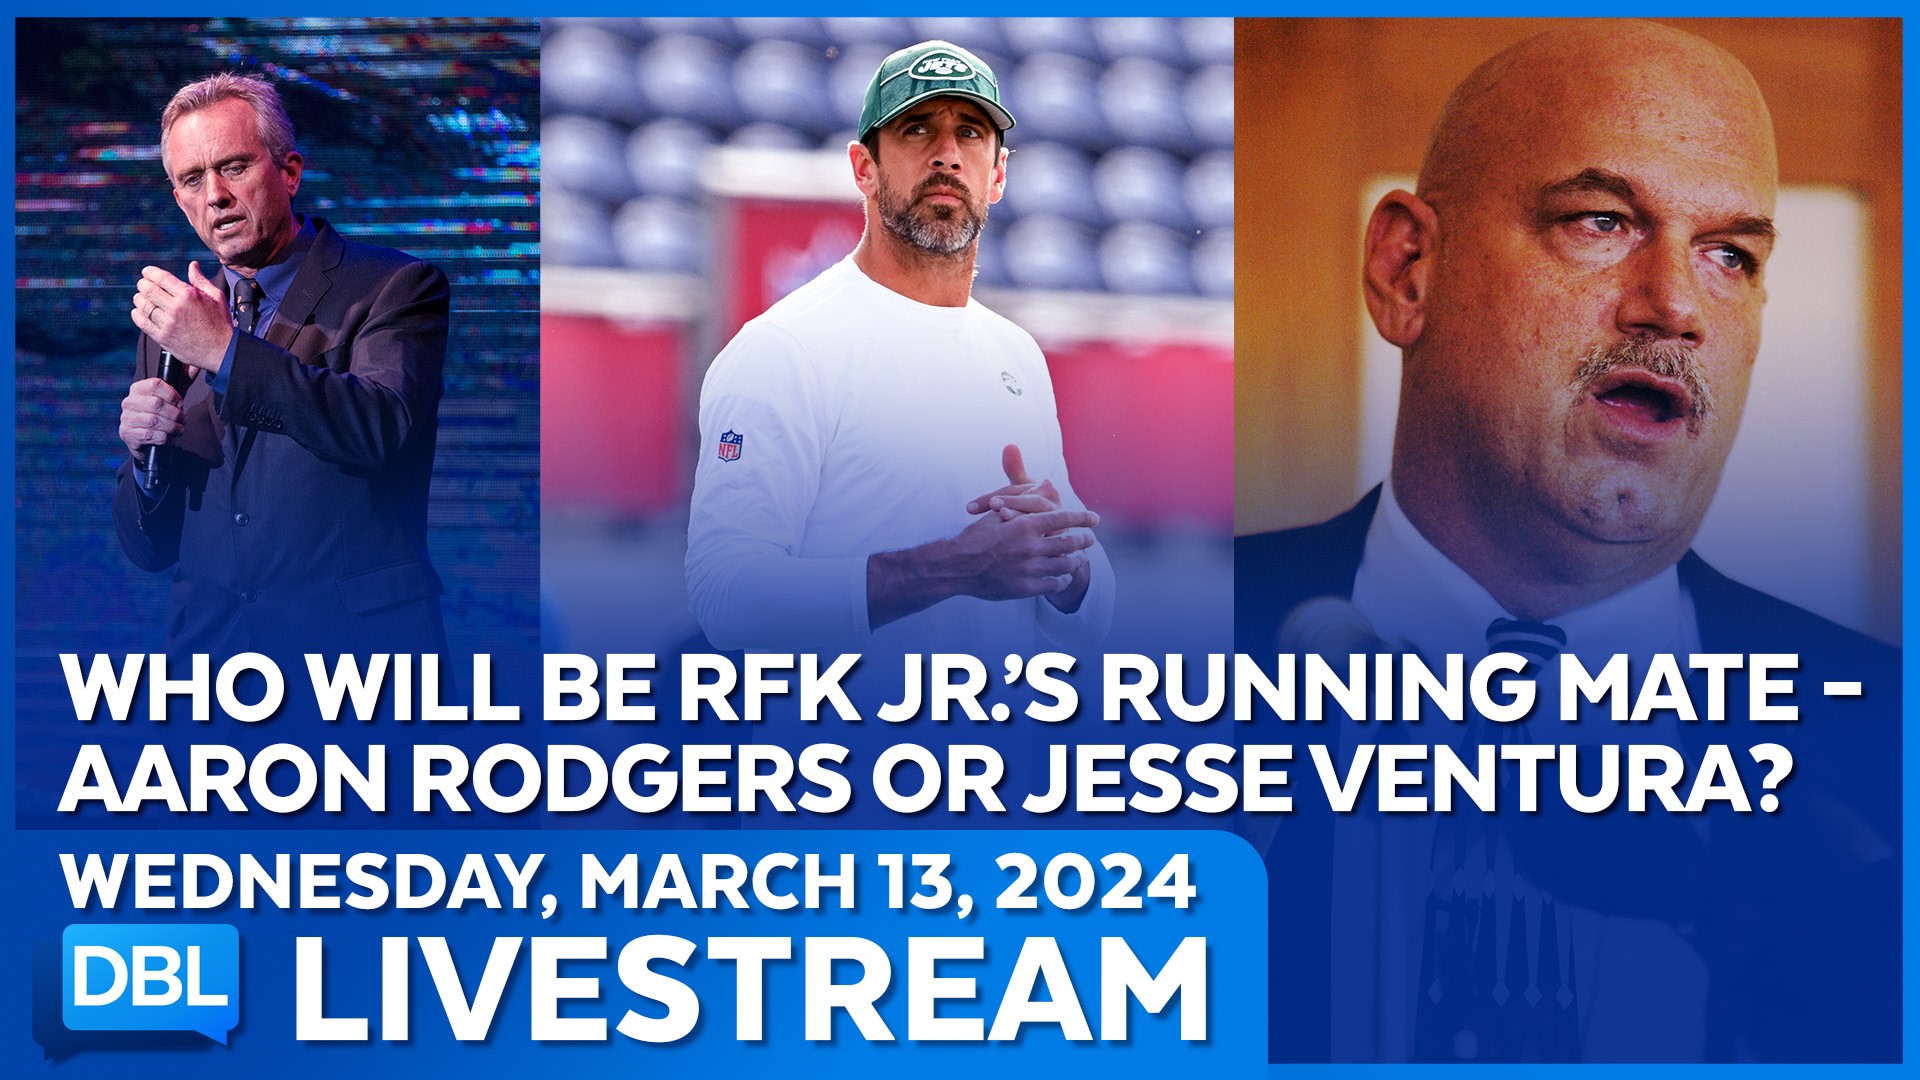 Who Will Be RFK Jr.'s Vice President, Aaron Rodgers Or Jesse Ventura?